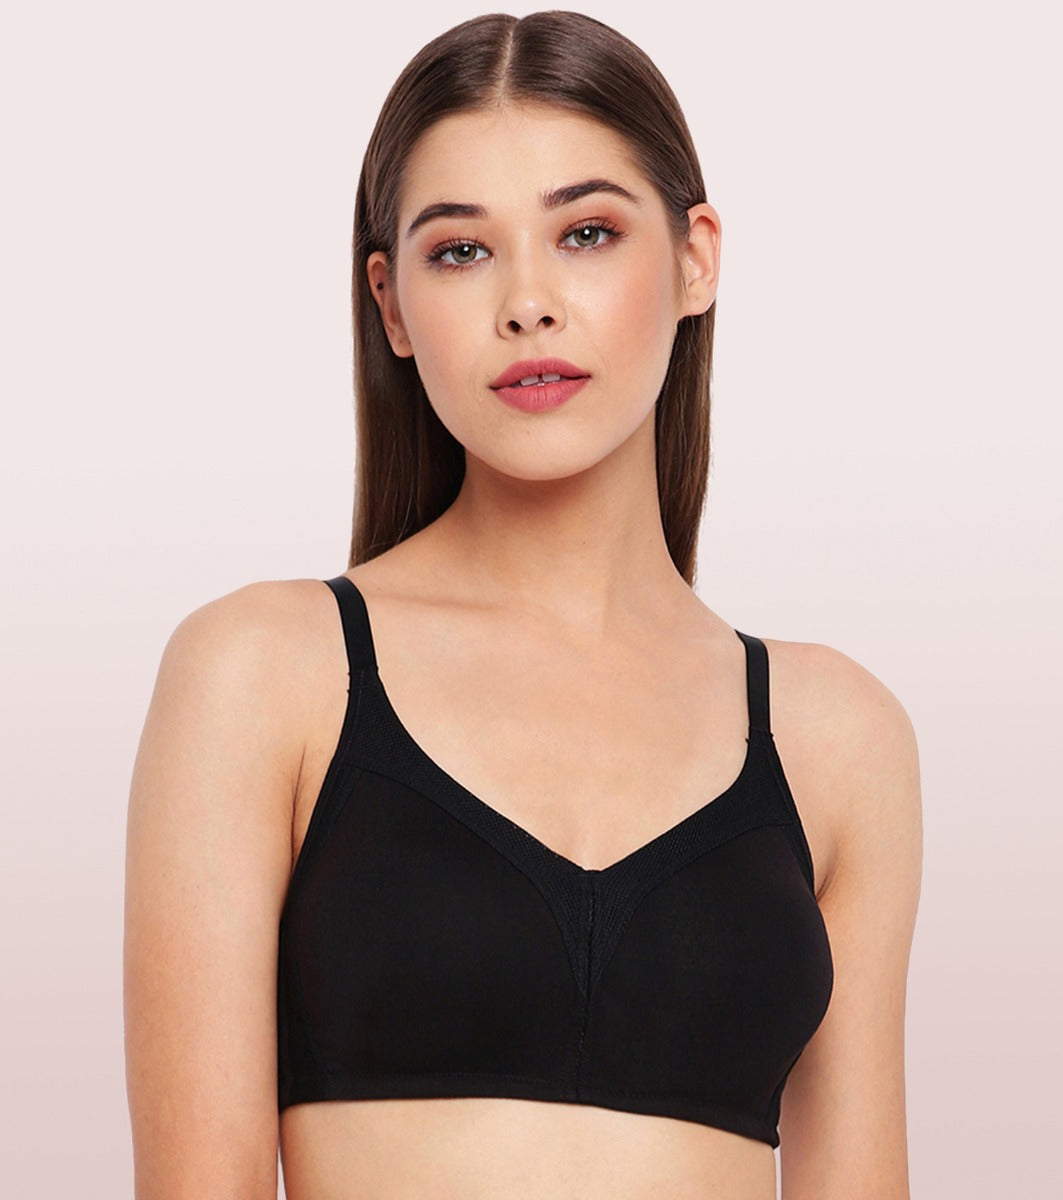 Enamor Fab-Cool AB75 M-frame Jiggle Control Full Support Stretch Cotton Bra for Women- Full Coverage, Non Padded and Wirefree - Black